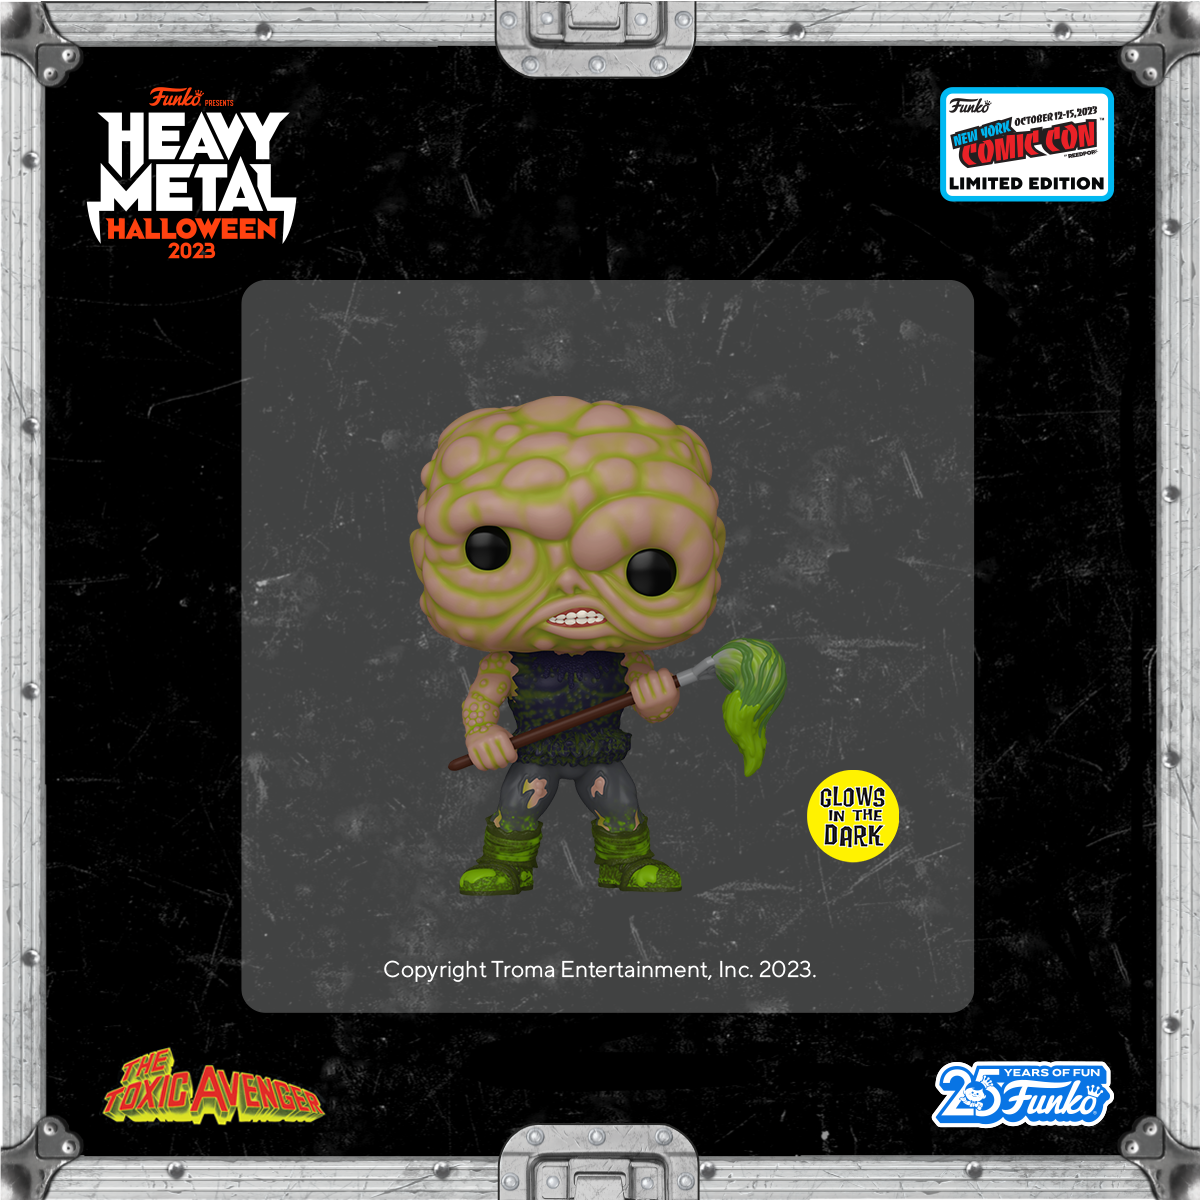 Making a clean sweep now: glow-in-the-dark Pop! Toxic Avenger. 